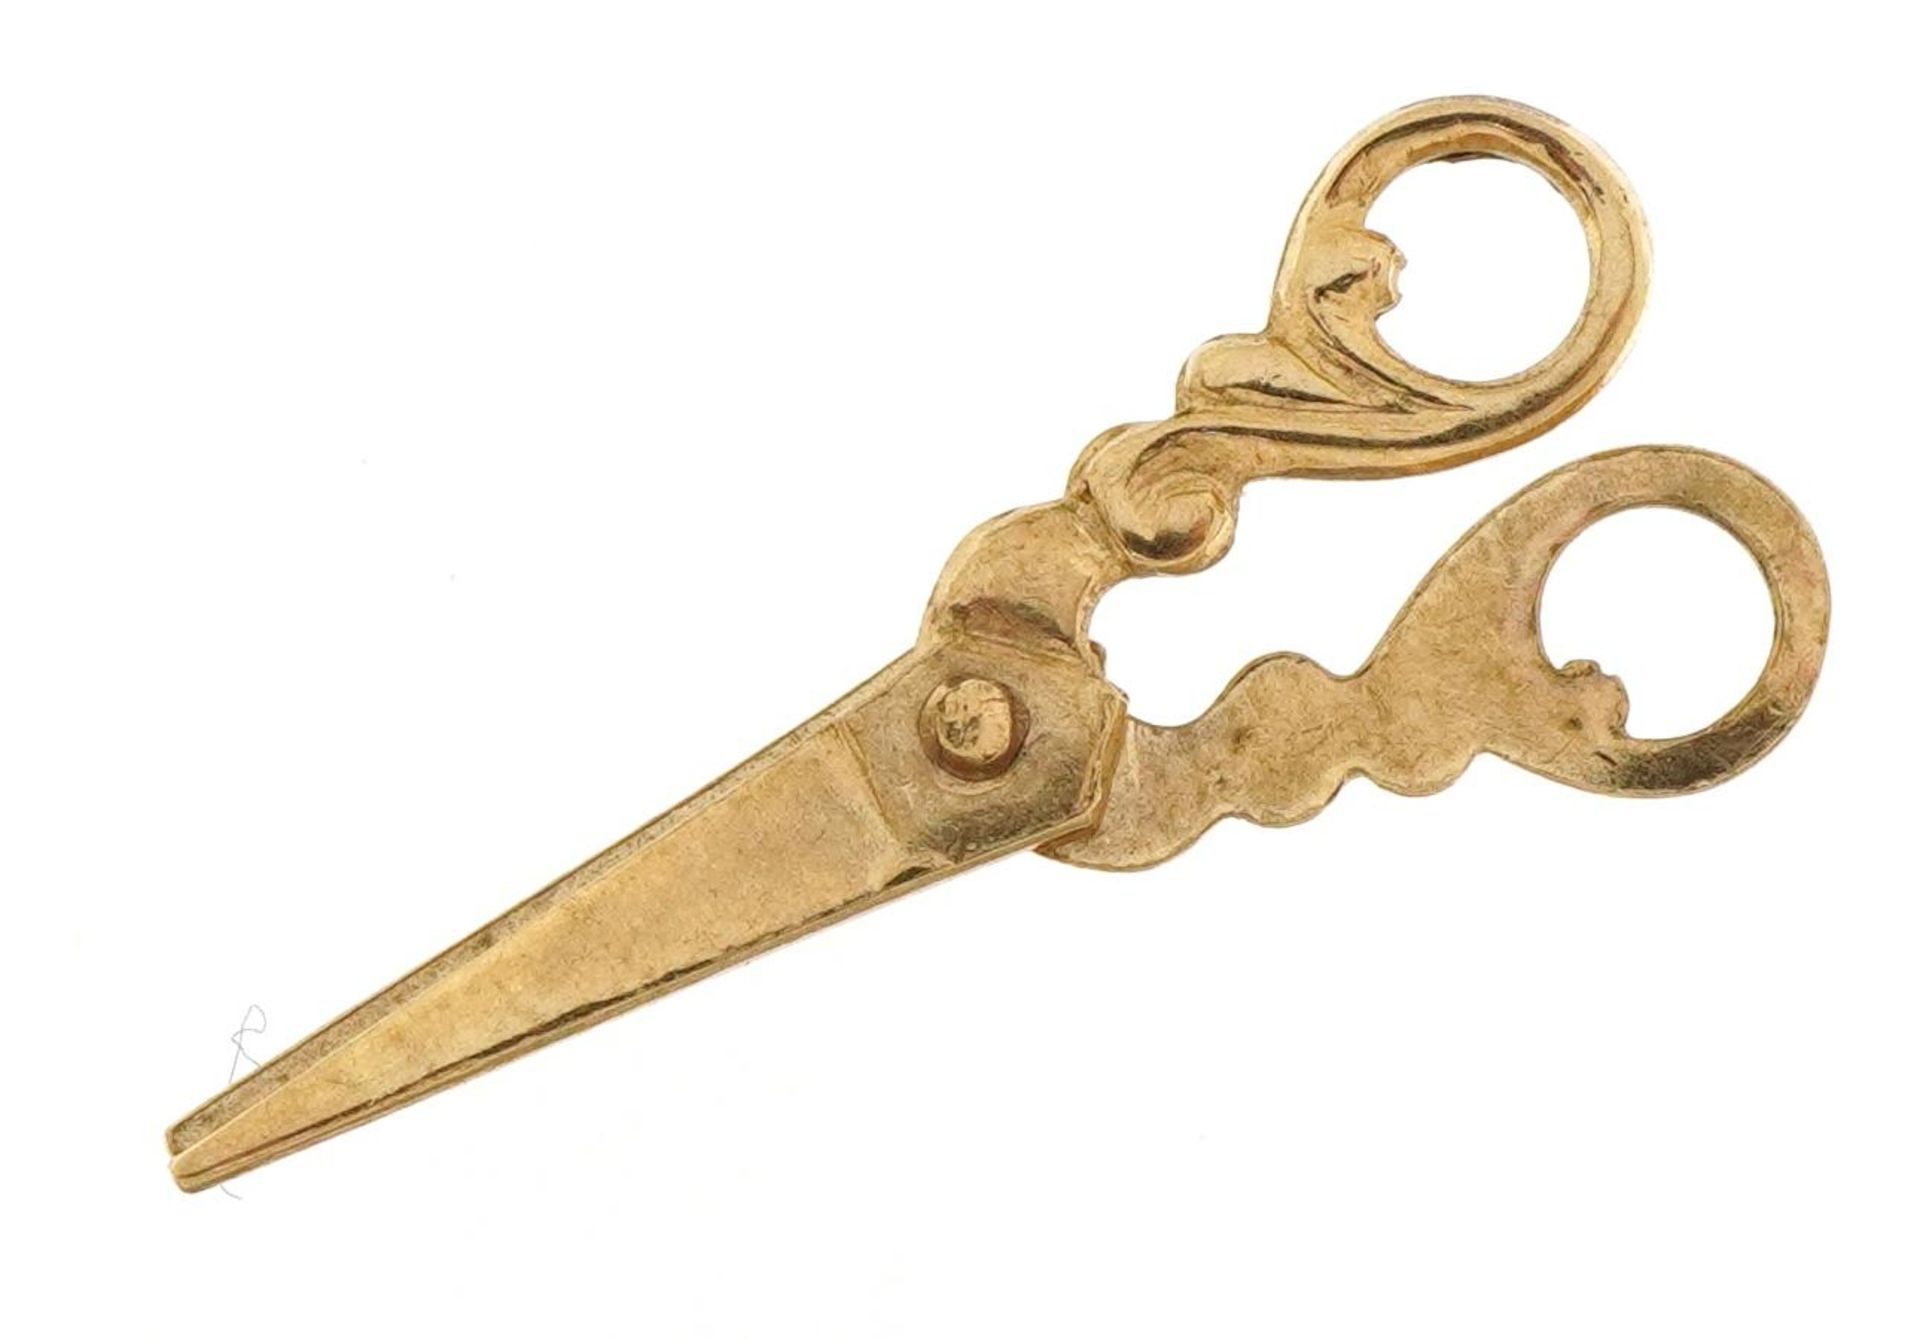 Unmarked gold opening scissors charm, 2.5cm in length, 0.8g